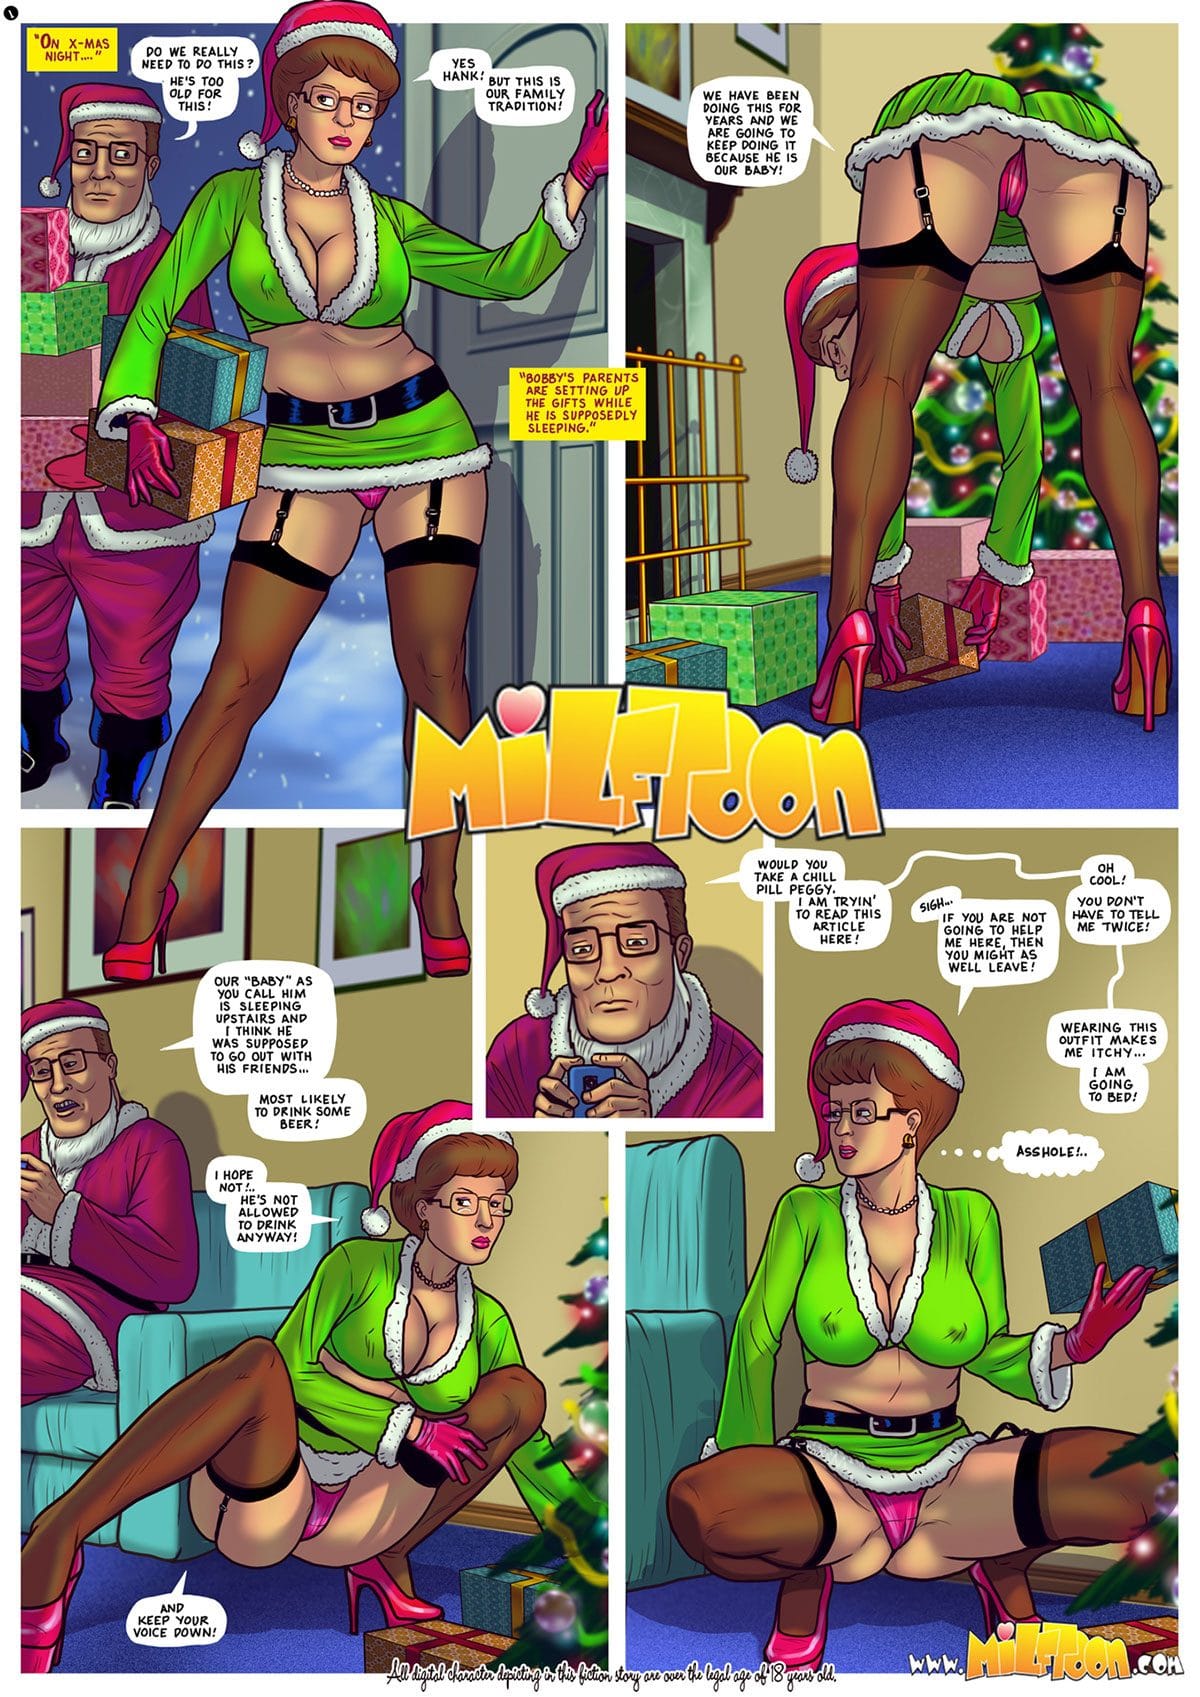 Milftoon comic "King of the Xmas" - page 1